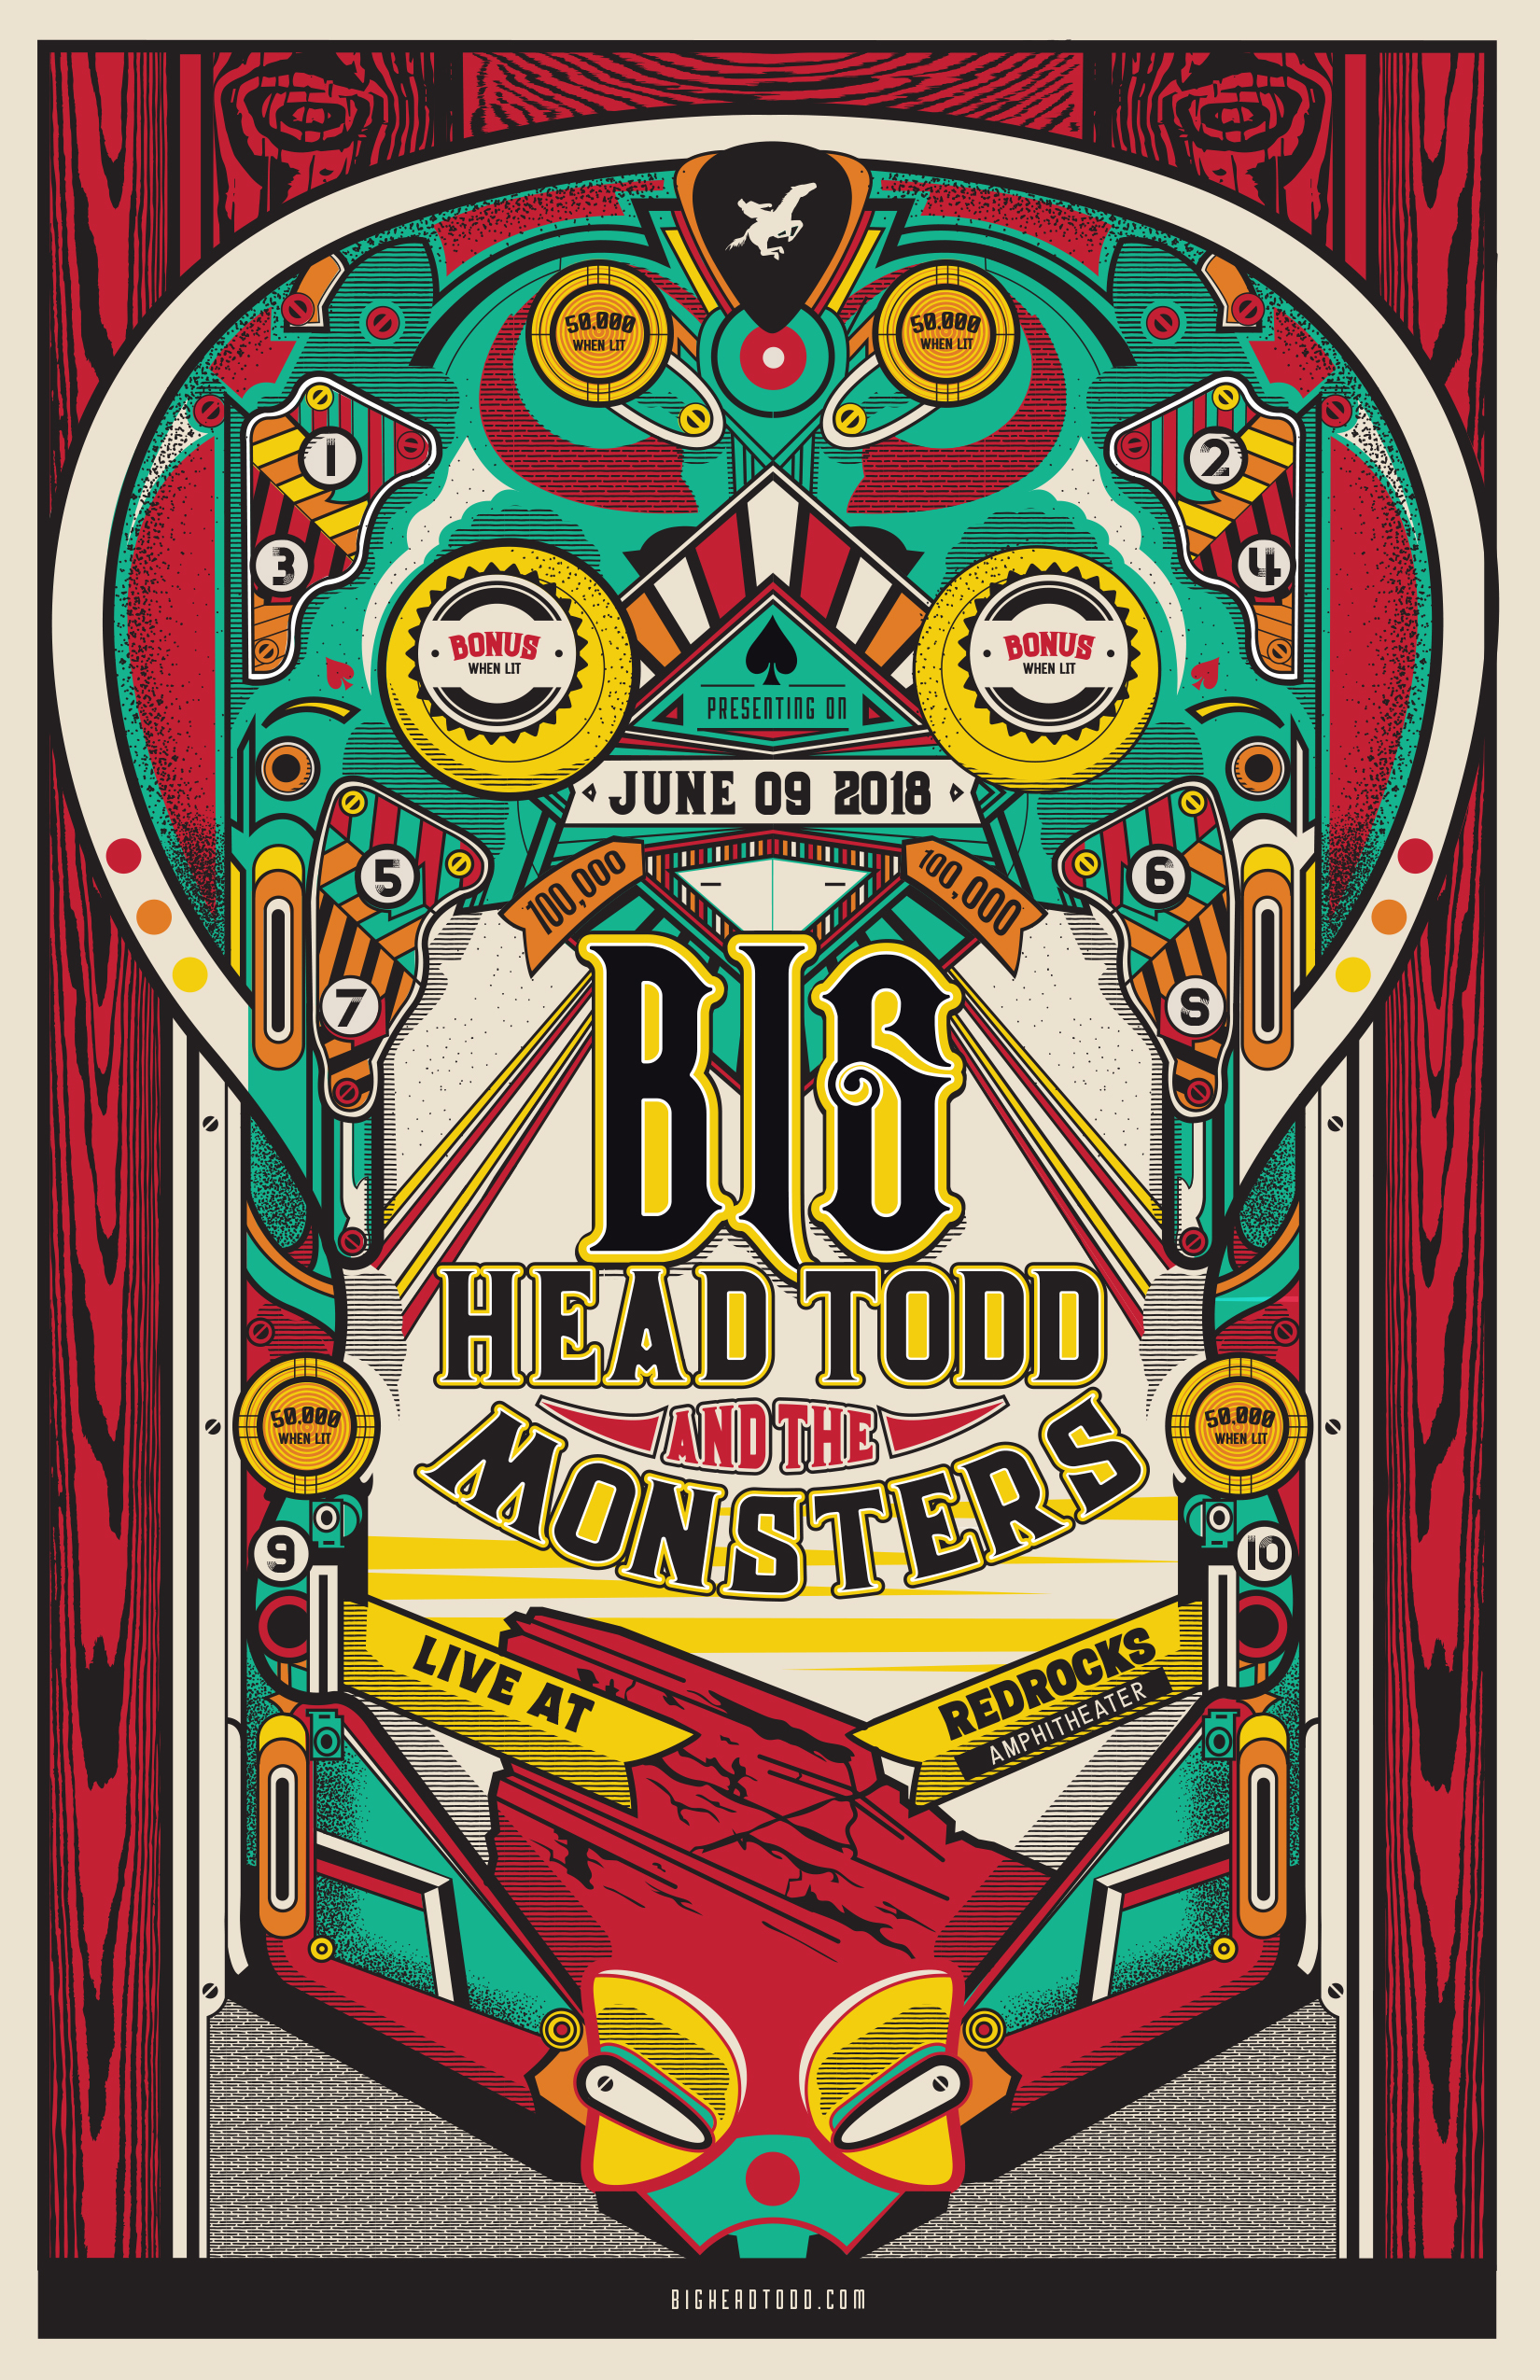 SUMMER ANNOUNCEMENT : Big Head Todd returns to Red Rocks on June 9th! Pre-Sale tickets available TOMORROW 1/22! 